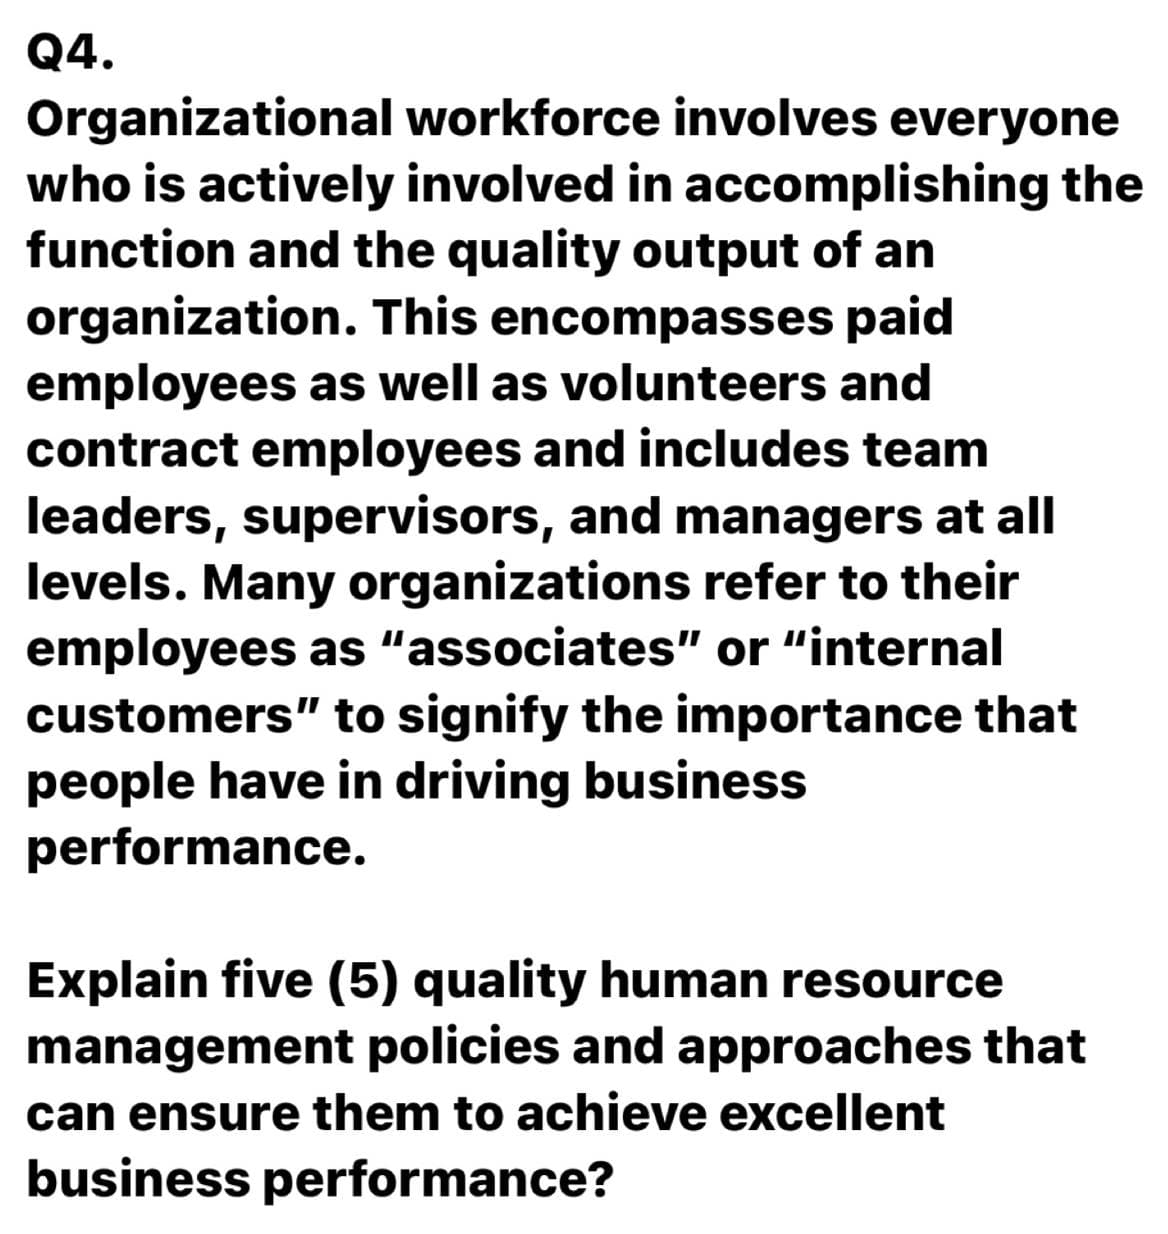 Q4.
Organizational workforce involves everyone
who is actively involved in accomplishing the
function and the quality output of an
organization. This encompasses paid
employees as well as volunteers and
contract employees and includes team
leaders, supervisors, and managers at all
levels. Many organizations refer to their
employees as "associates" or "internal
customers" to signify the importance that
people have in driving business
performance.
Explain five (5) quality human resource
management policies and approaches that
can ensure them to achieve excellent
business performance?
